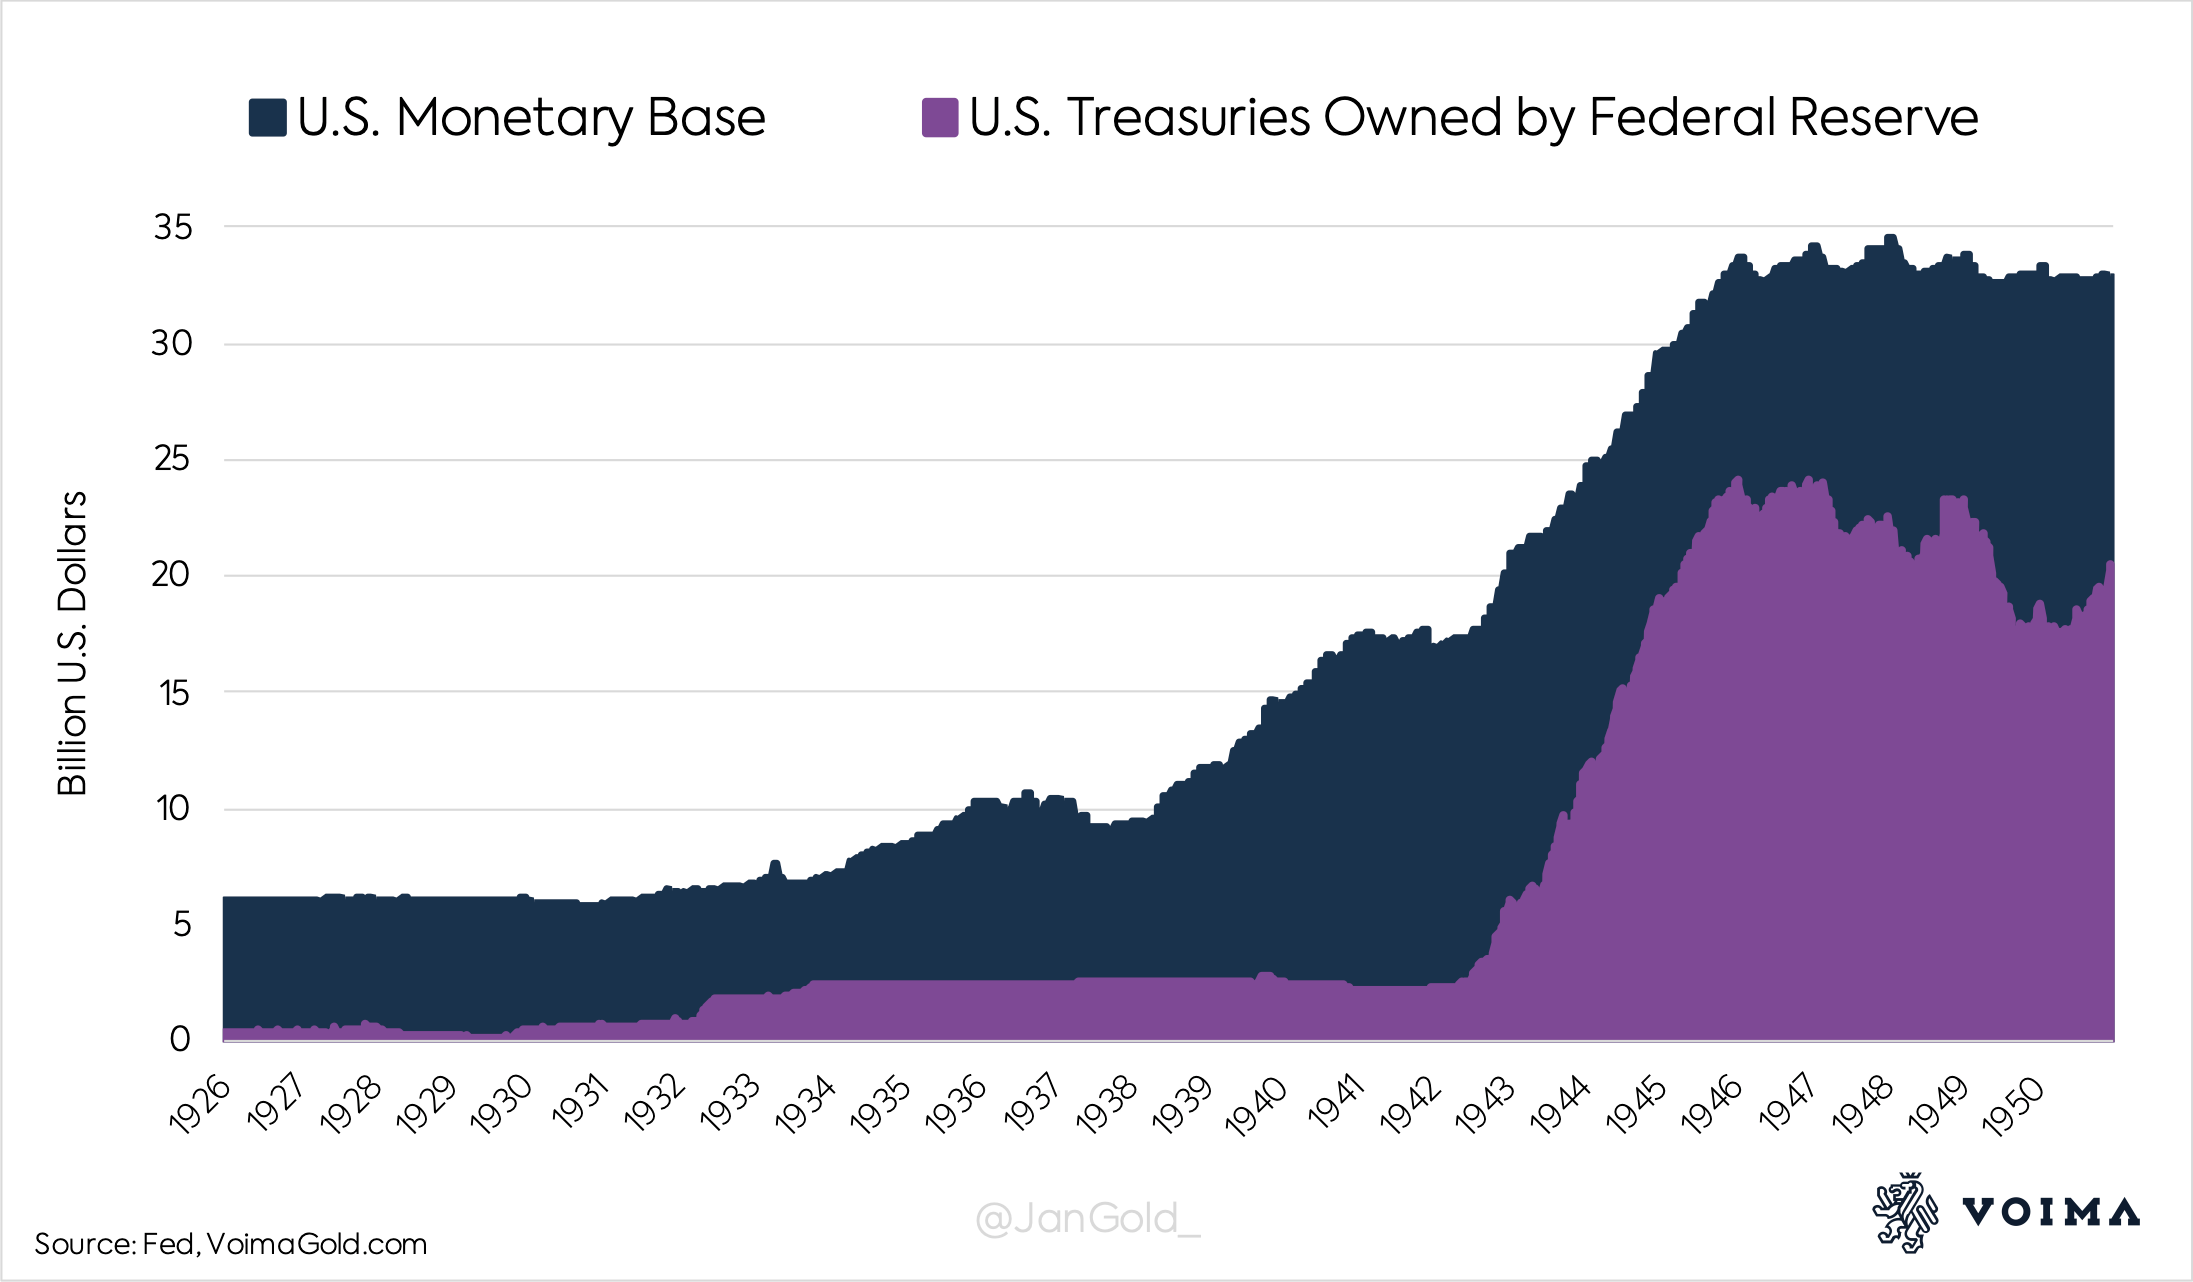 From 1934 until 1940 the monetary base grew because the U.S. had devalued the dollar against gold in 1934, but sustained a peg in international markets at $35 an ounce. The Treasury bought thousands of tonnes of gold from around the world at the newly fixed price. The Fed printed the dollars to pay for the gold, and received gold certificates in return from the Treasury.